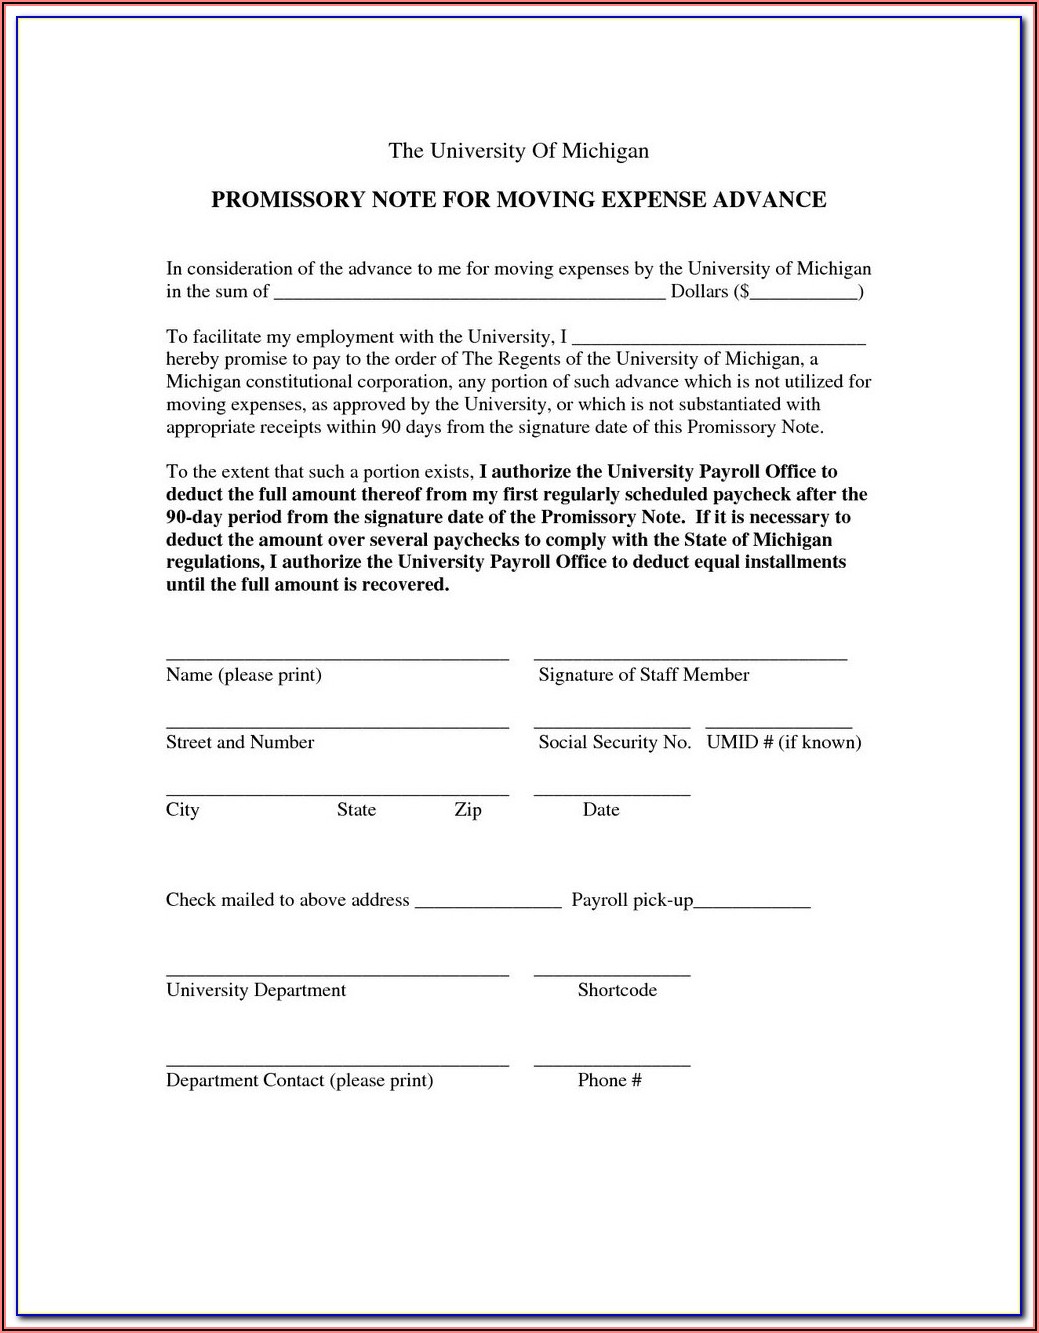 Simple Promissory Note Template Canada